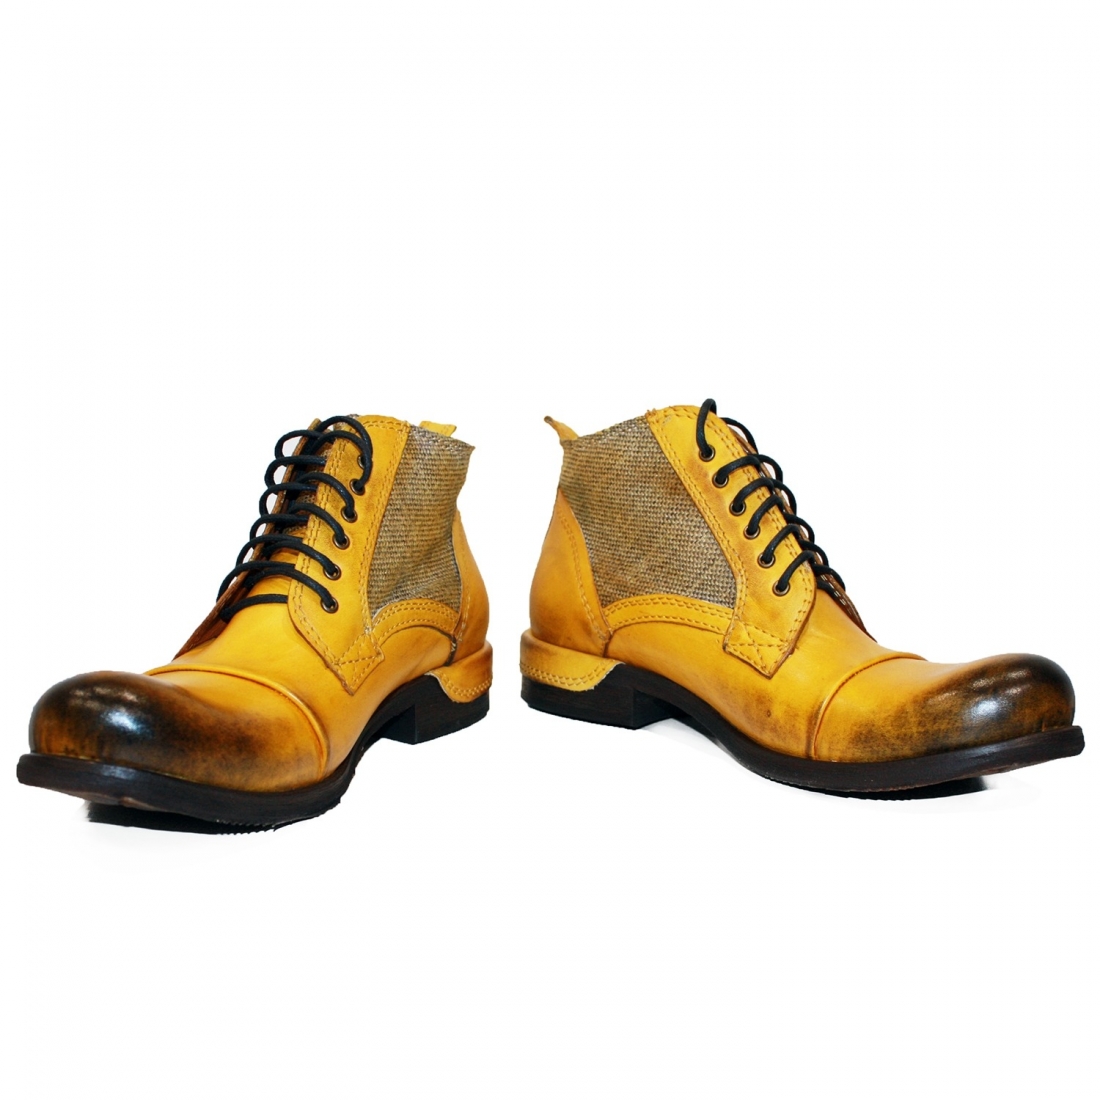 Modello Buecello - Other Boots - Handmade Colorful Italian Leather Shoes